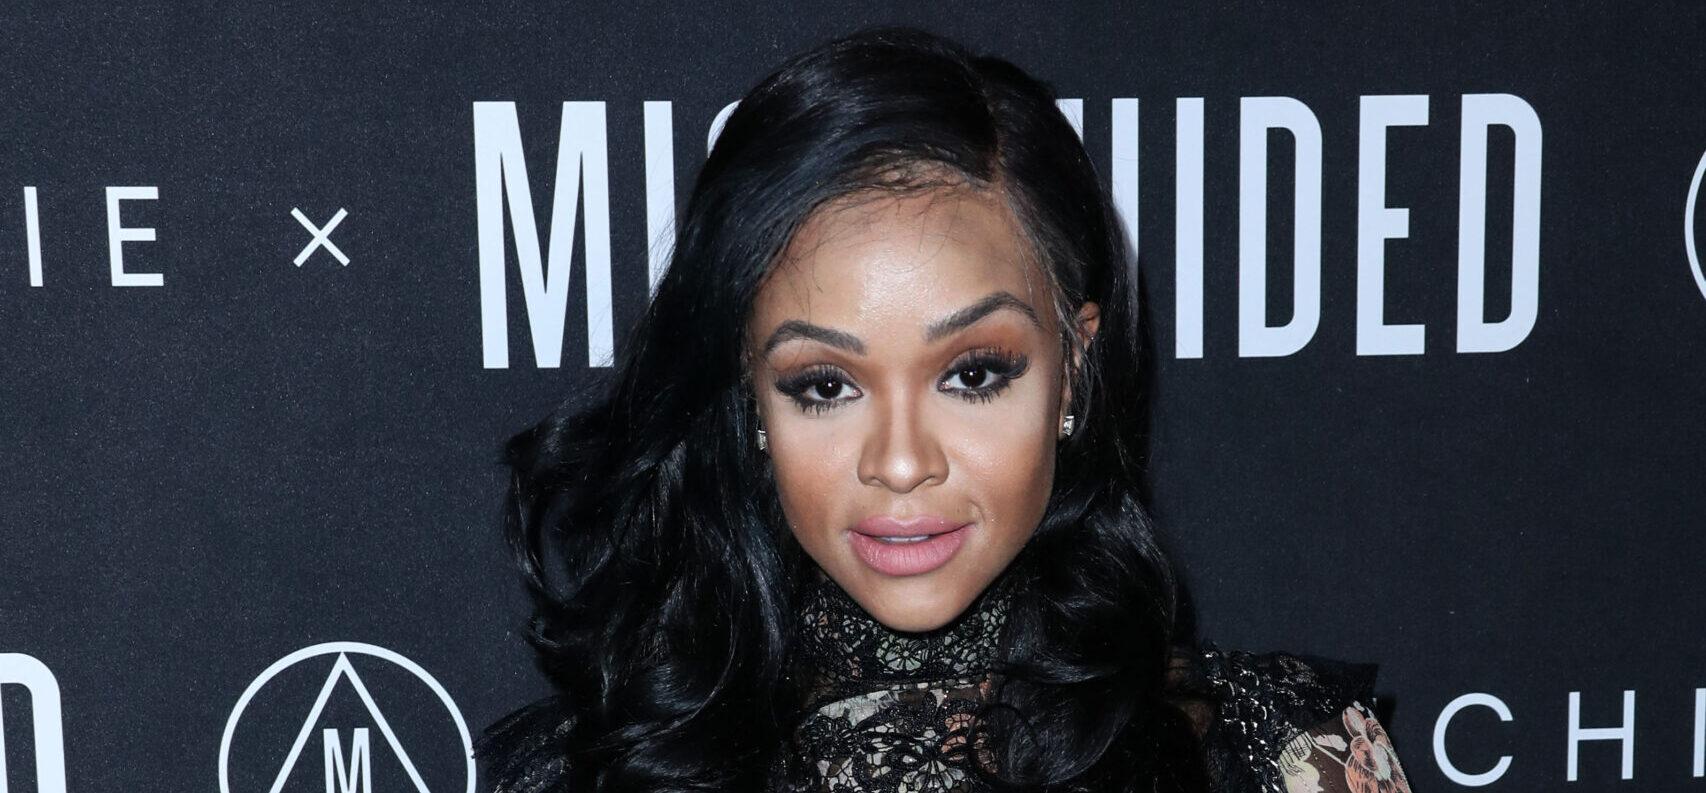 ‘Love & Hip Hop: Hollywood’ Star Masika Kalysha Files To Annul Her Marriage